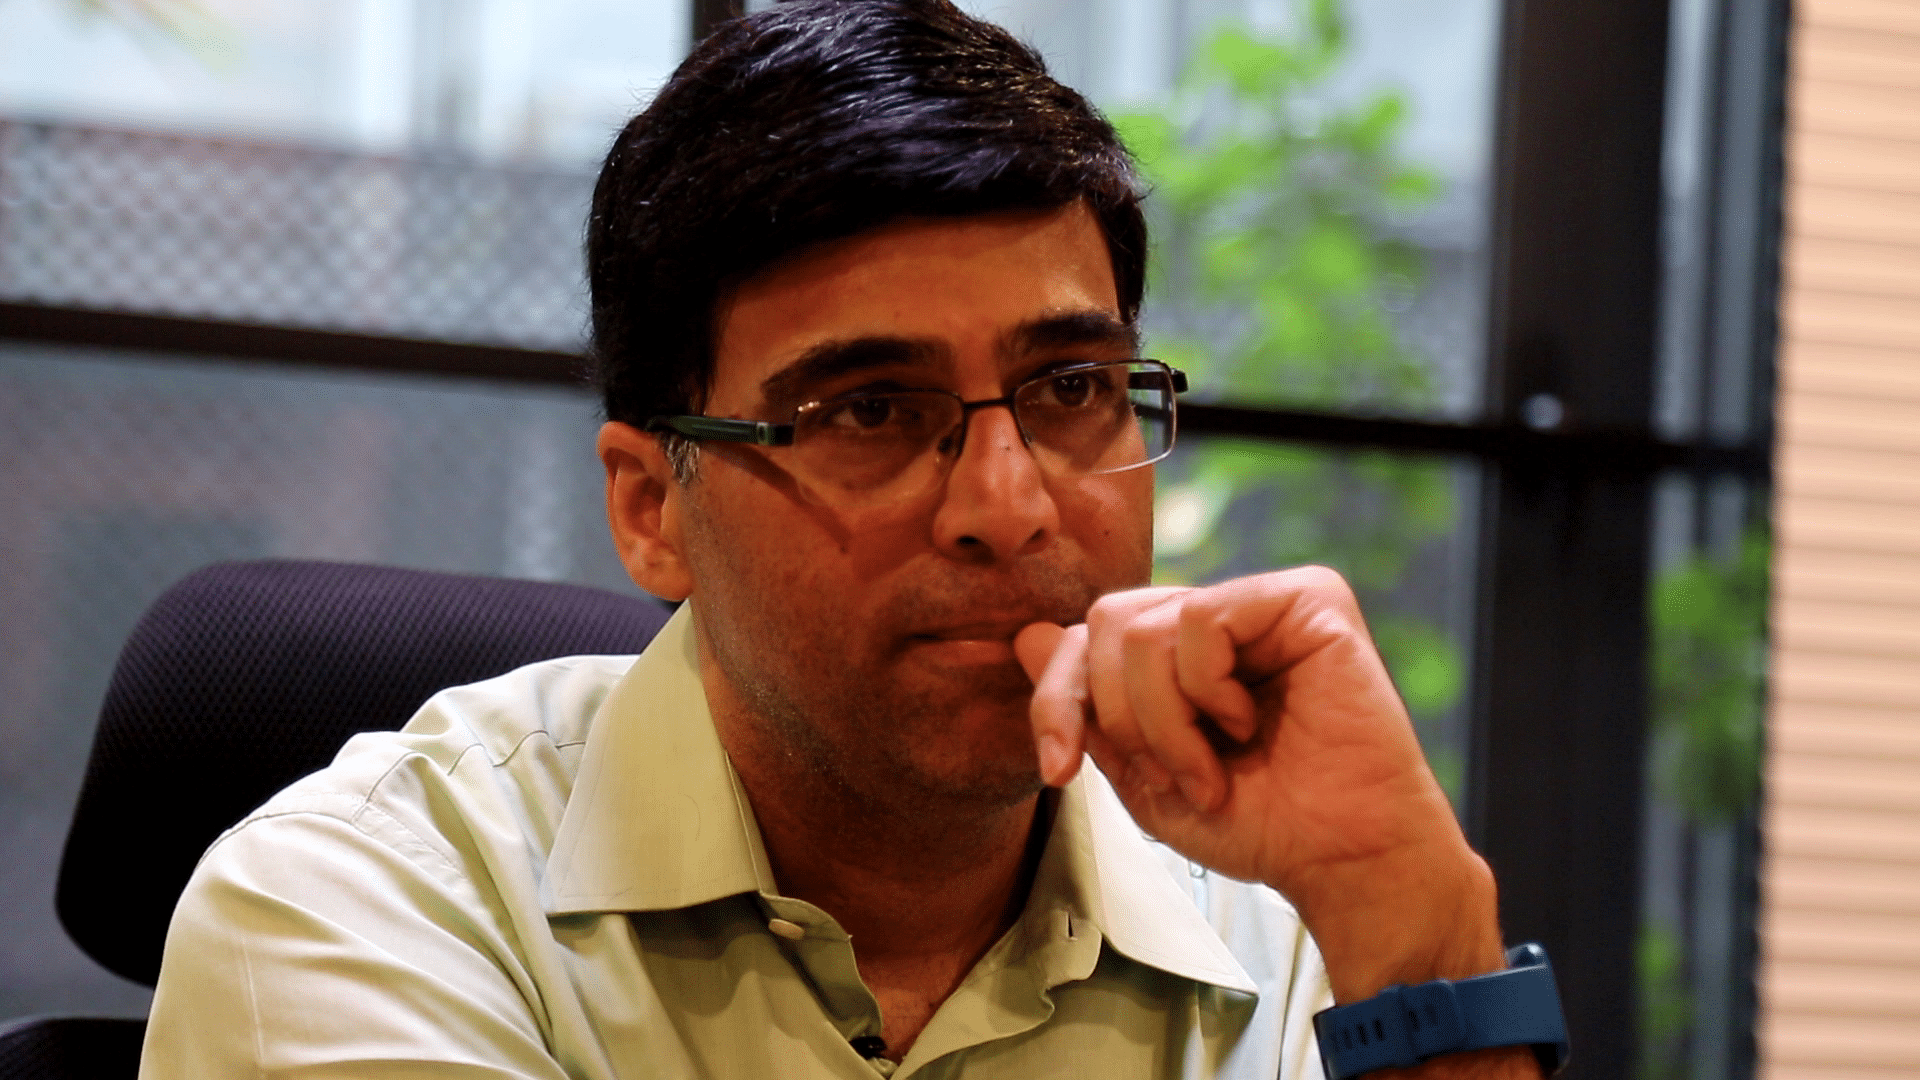 Viswanathan Anand won the World Chess Championship for the first time in 2000.